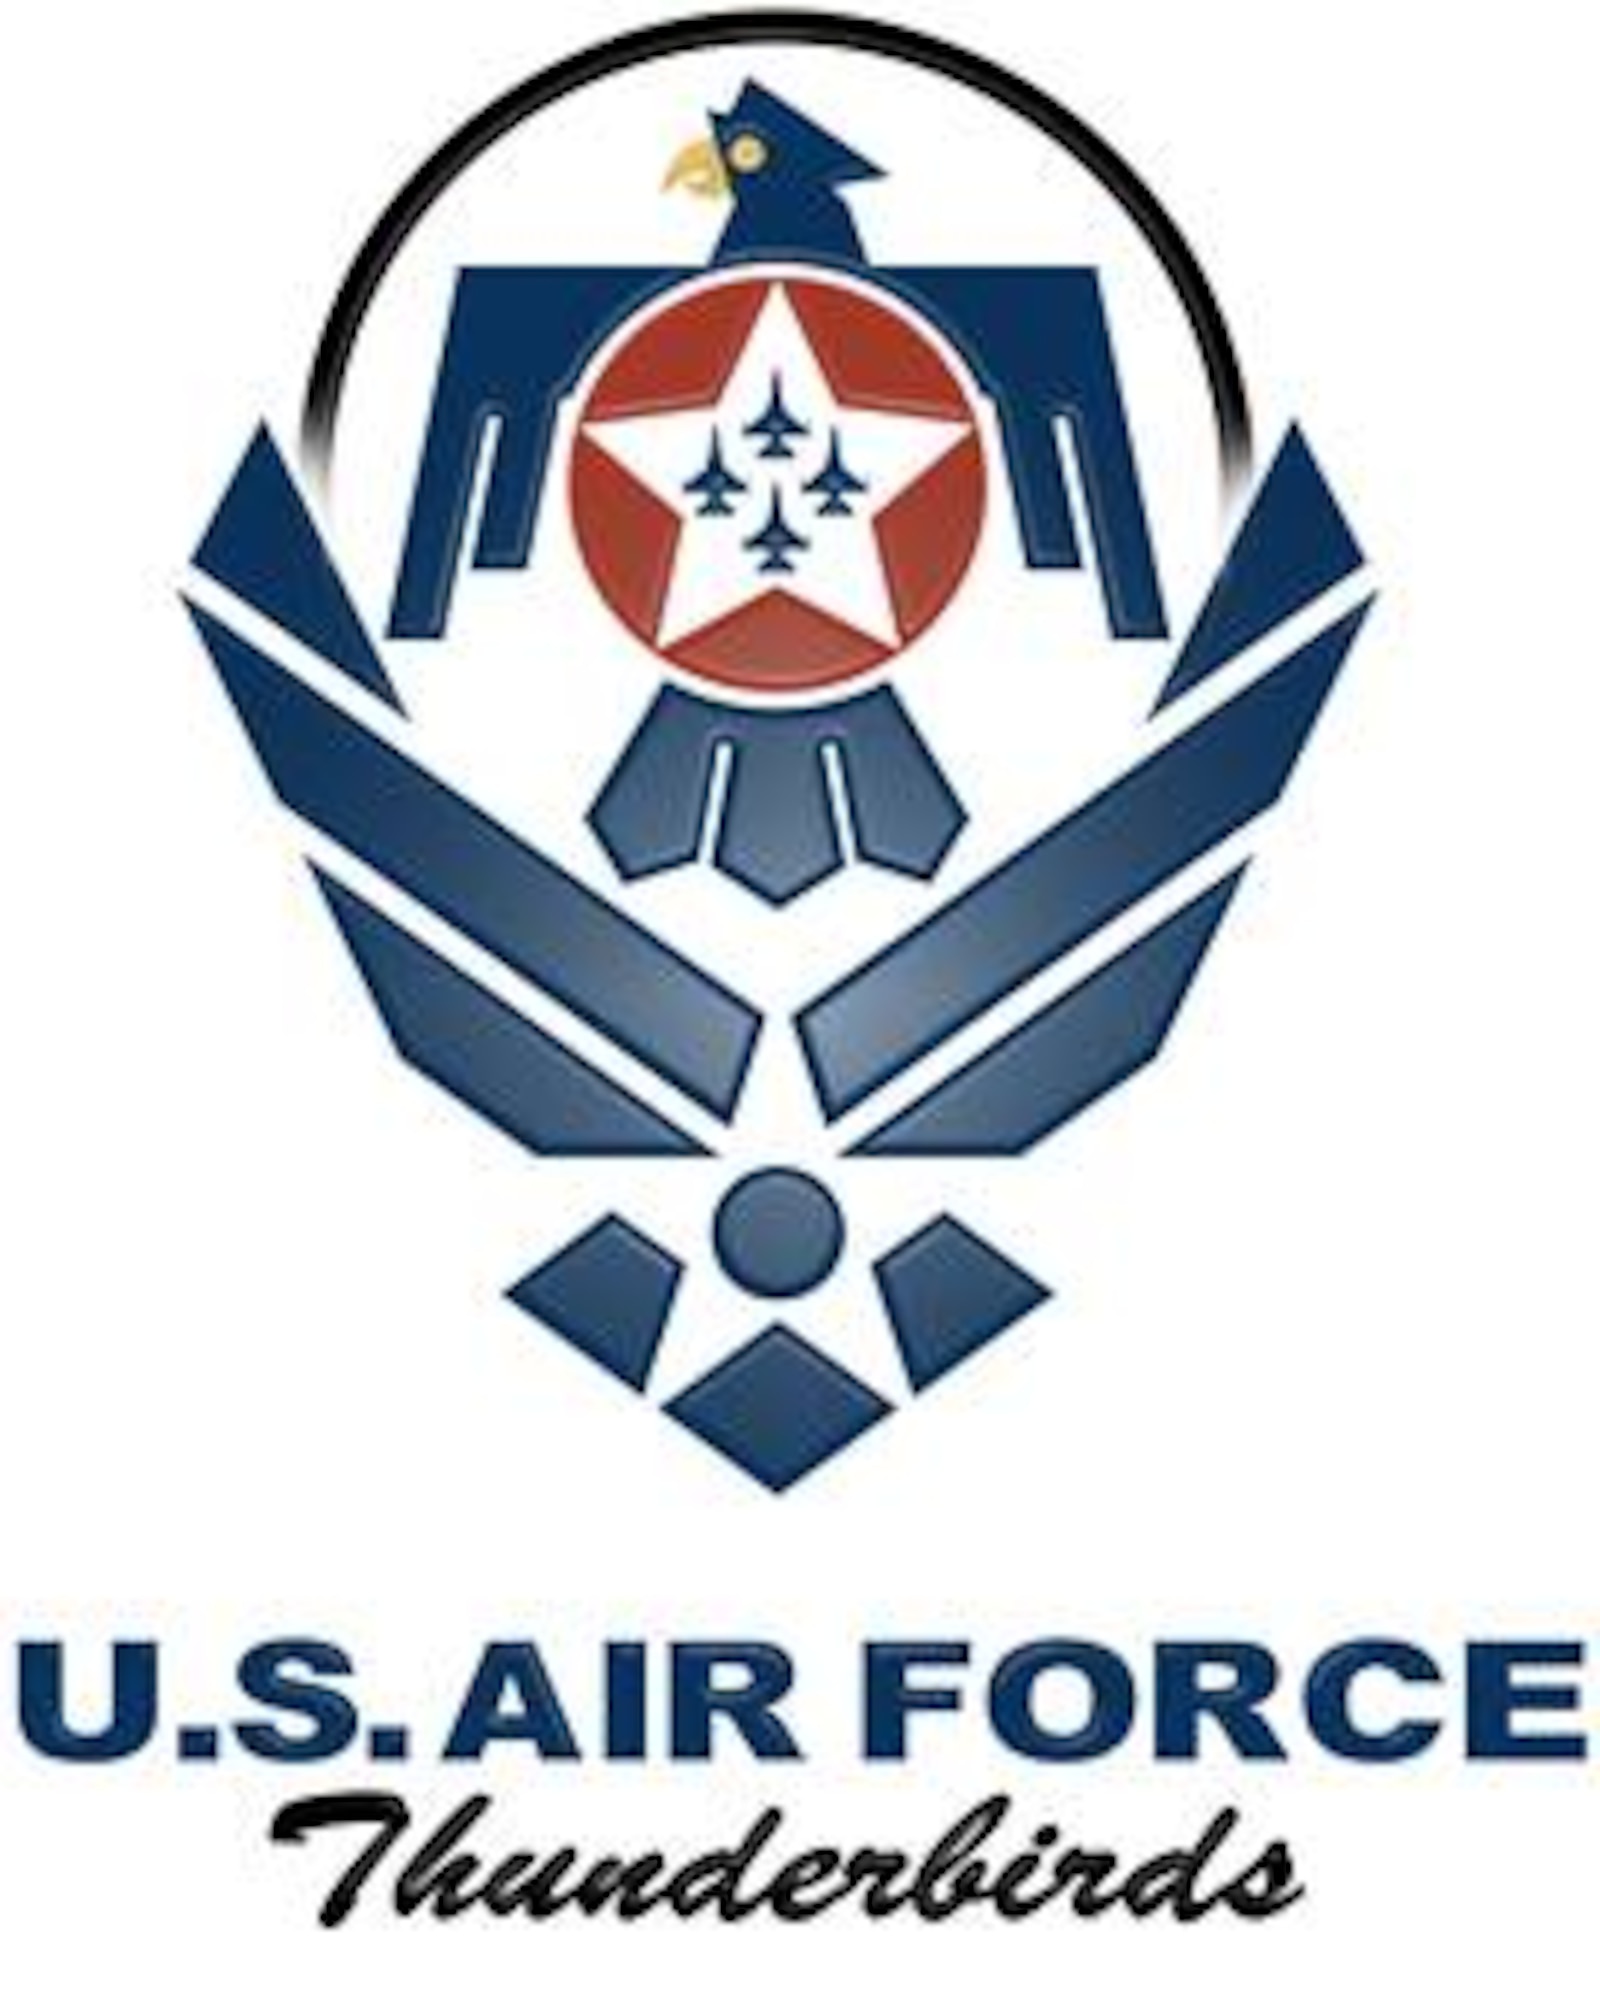 Air Force symbol with cradled Thunderbirds shield (color), U.S. Air Force graphic.